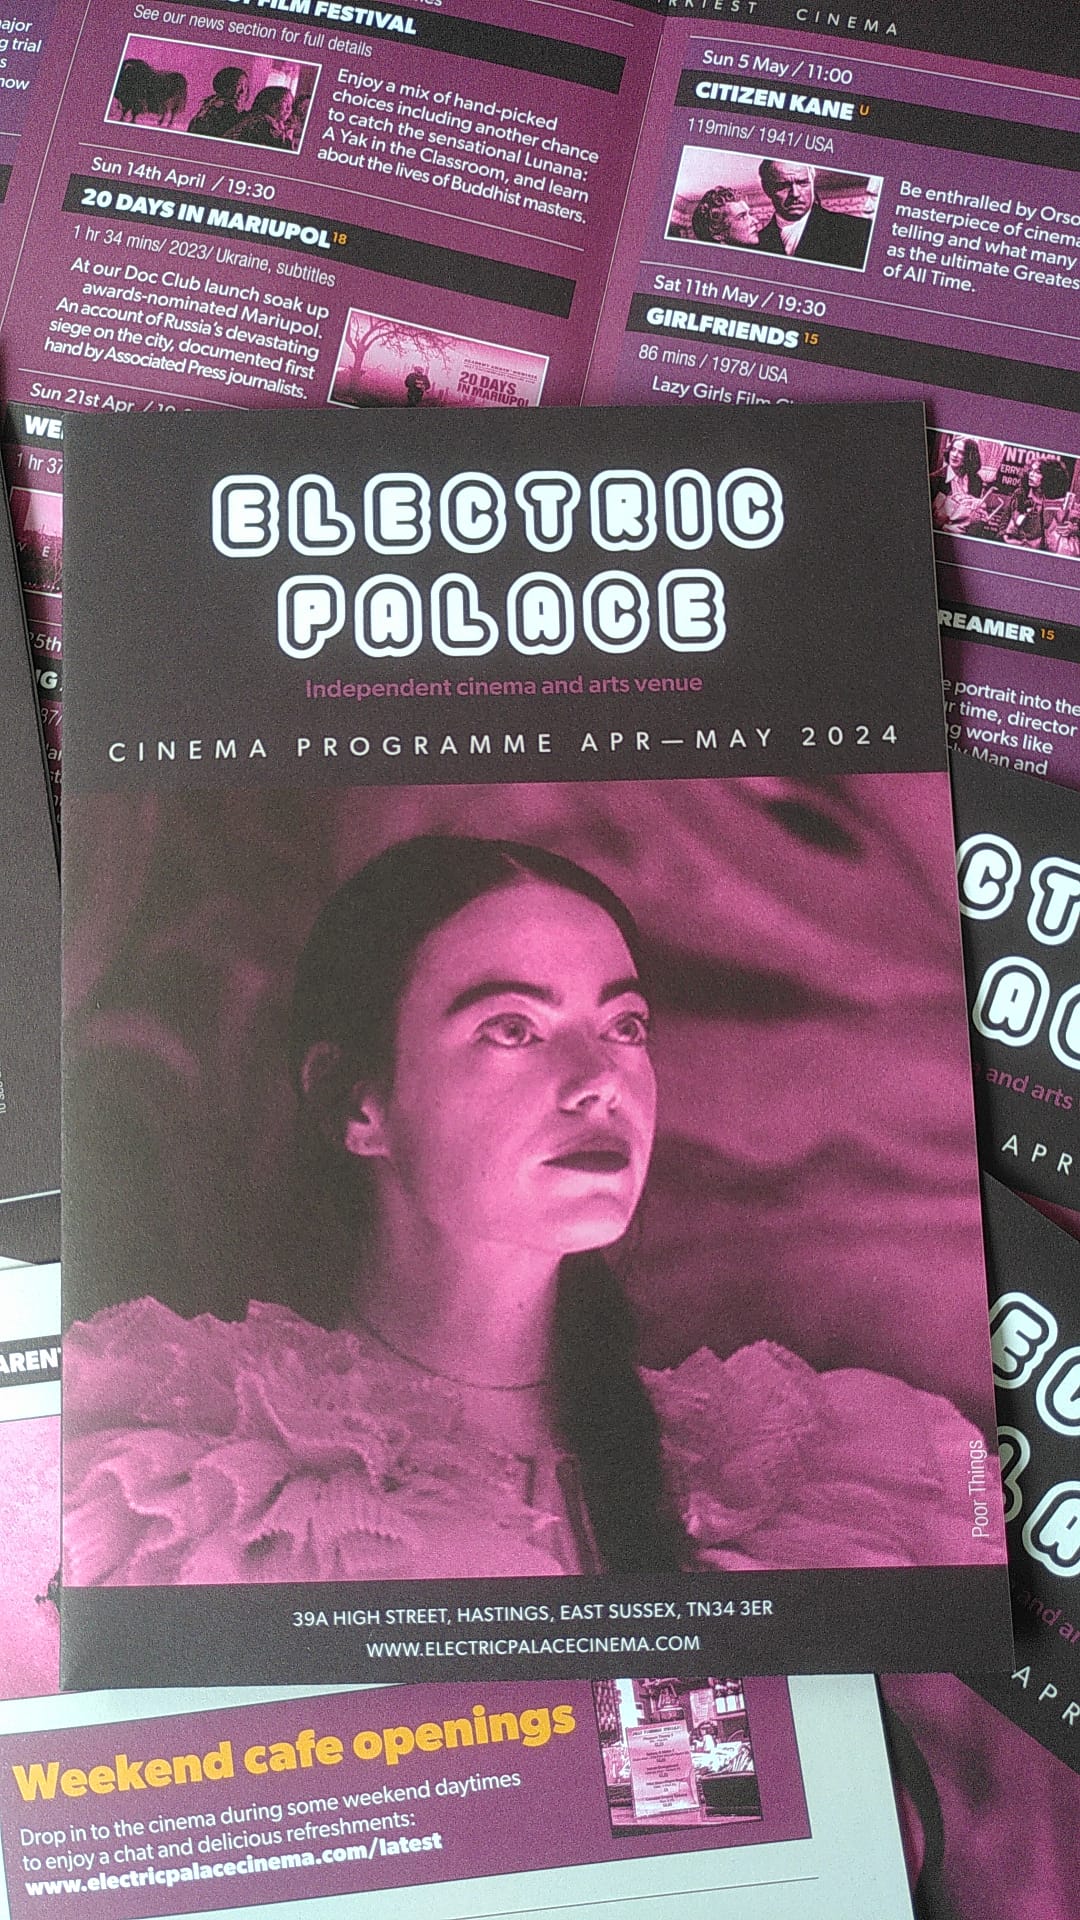 programme front cover showing a woman's face